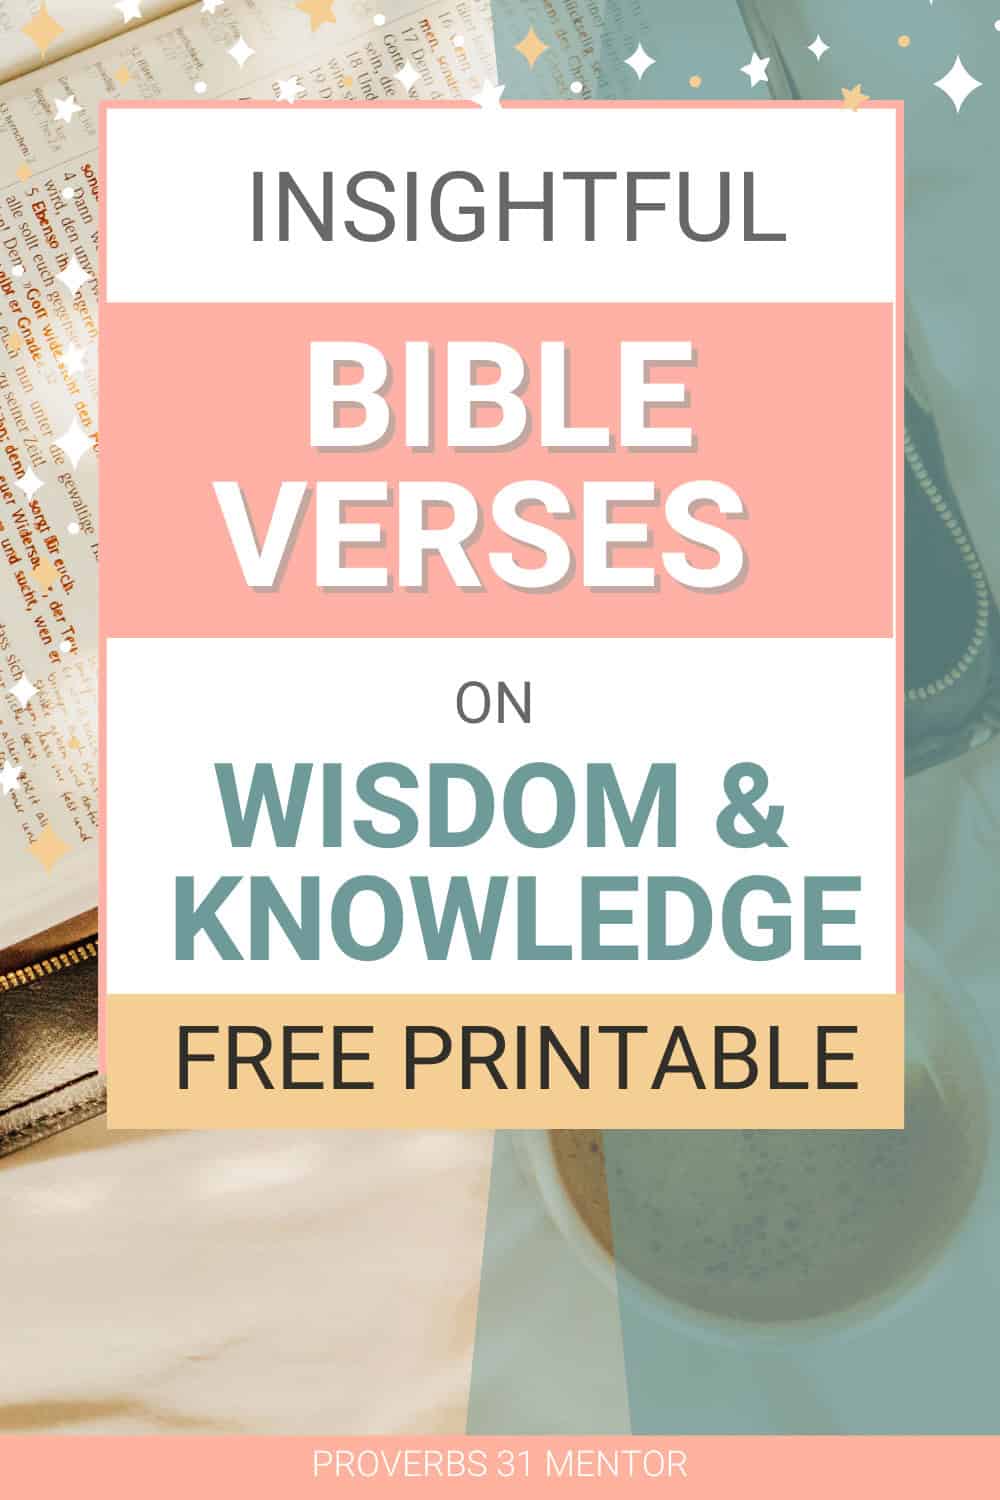 Title- Inspiring Bible Verses on Wisdom and Knowledge